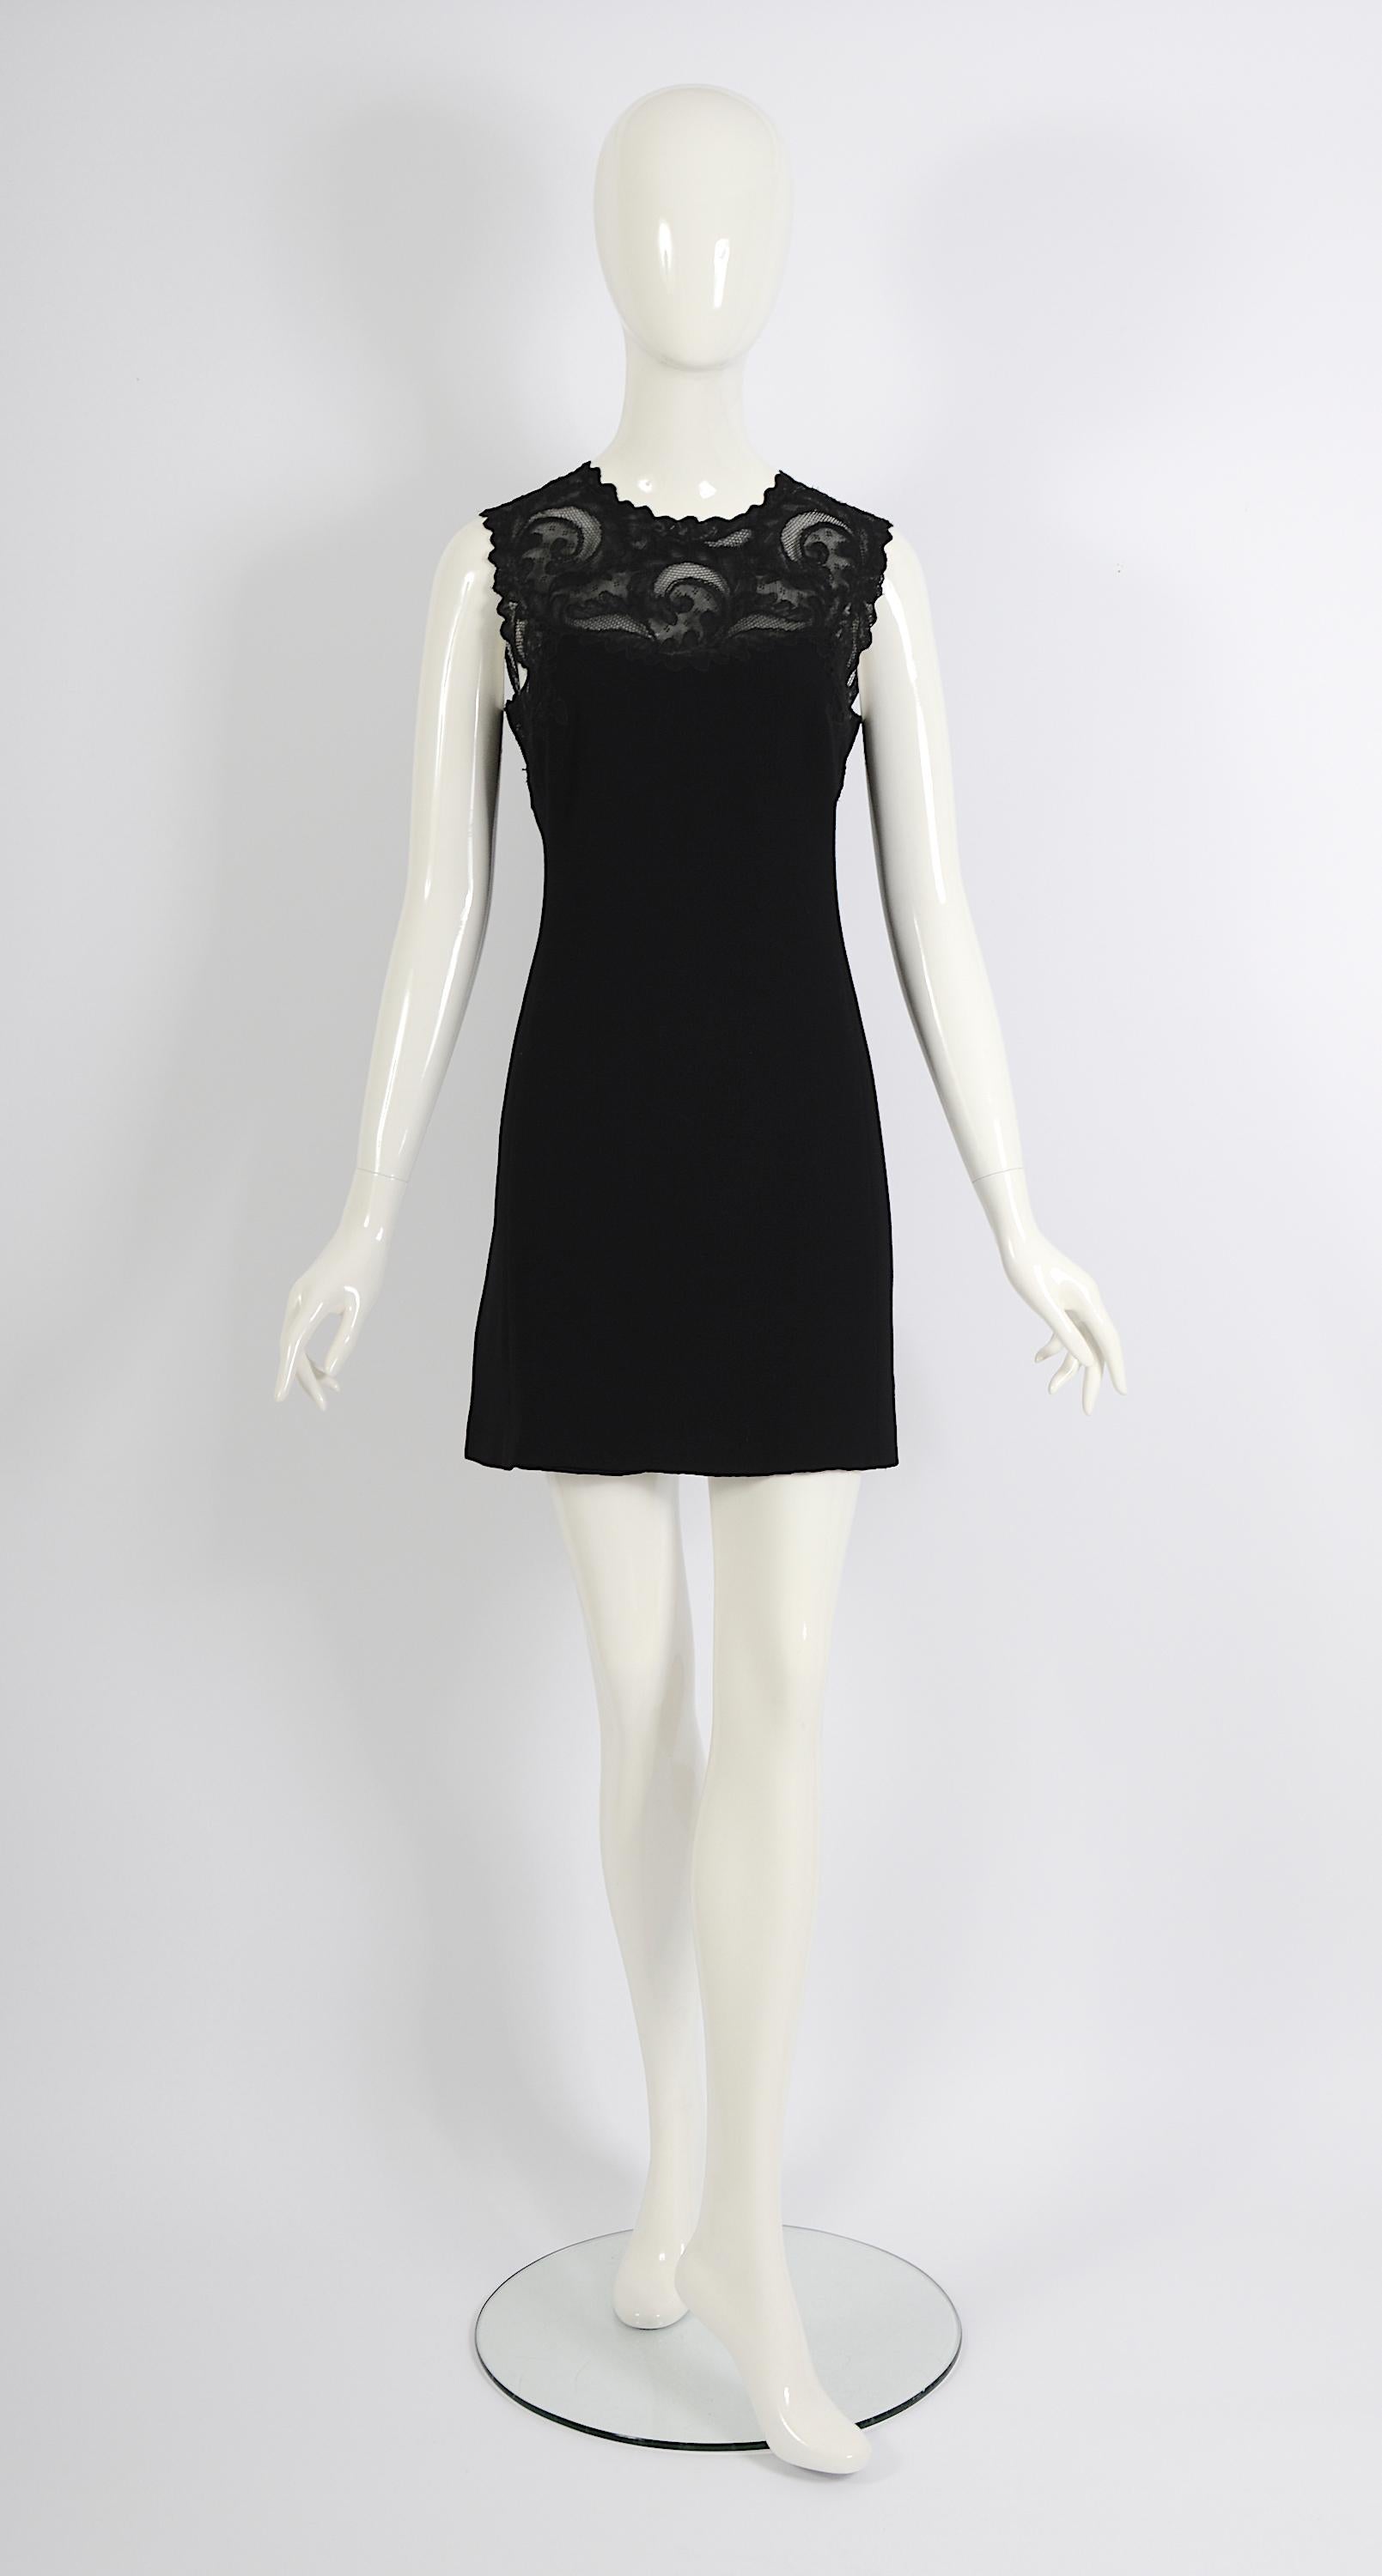 Vintage Gianni Versace couture fall winter 1996 sleeveless with crew neck trim embellishment mini shift dress.
Concealed Zip Closure at Back
The size label is missing please use the measurements that are taken flat: 
Sh to Sh 14inch/36cm - Ua to Ua